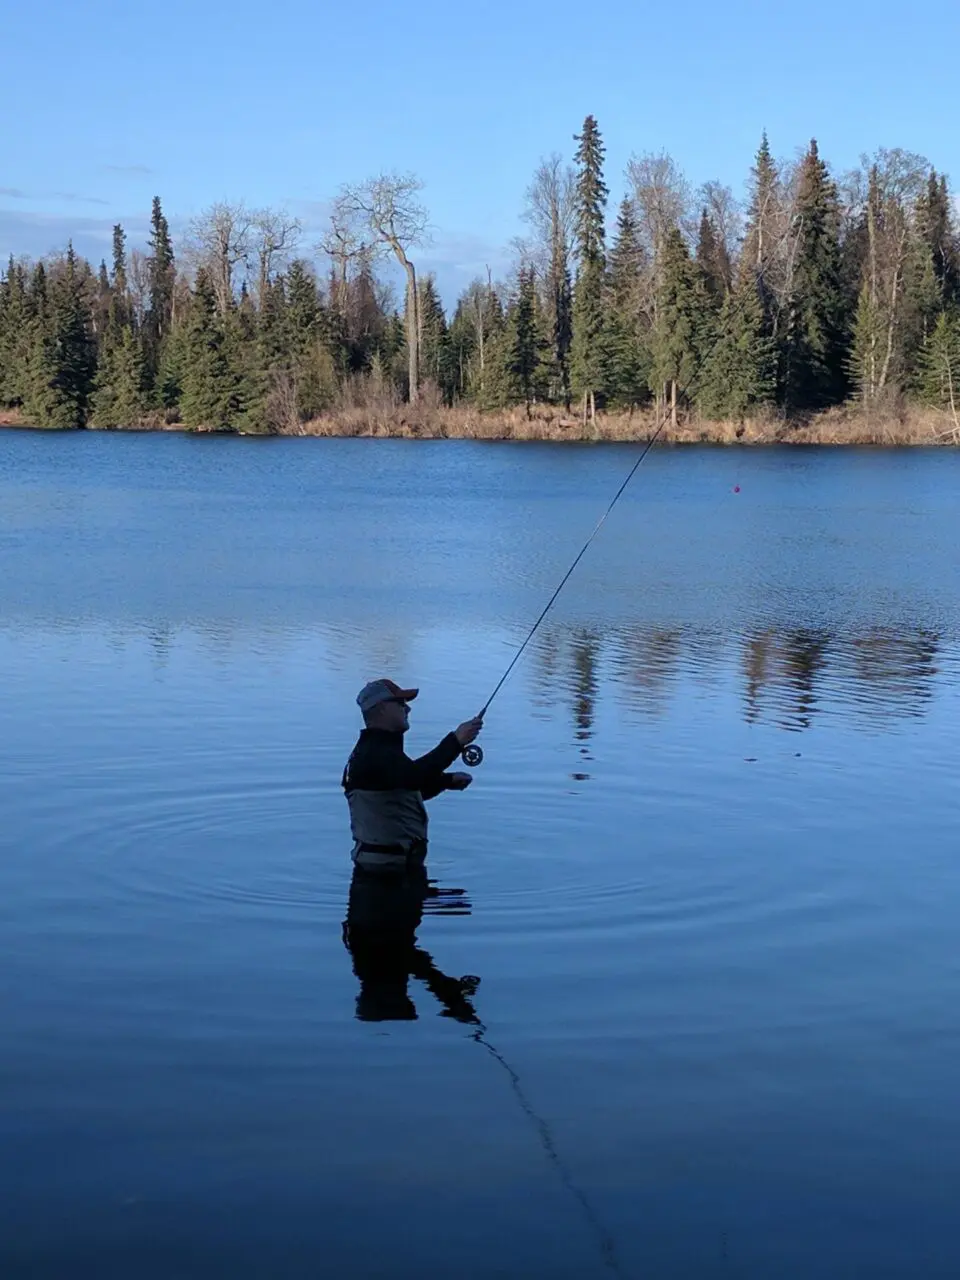 A man fishing in the water with trees in the background.